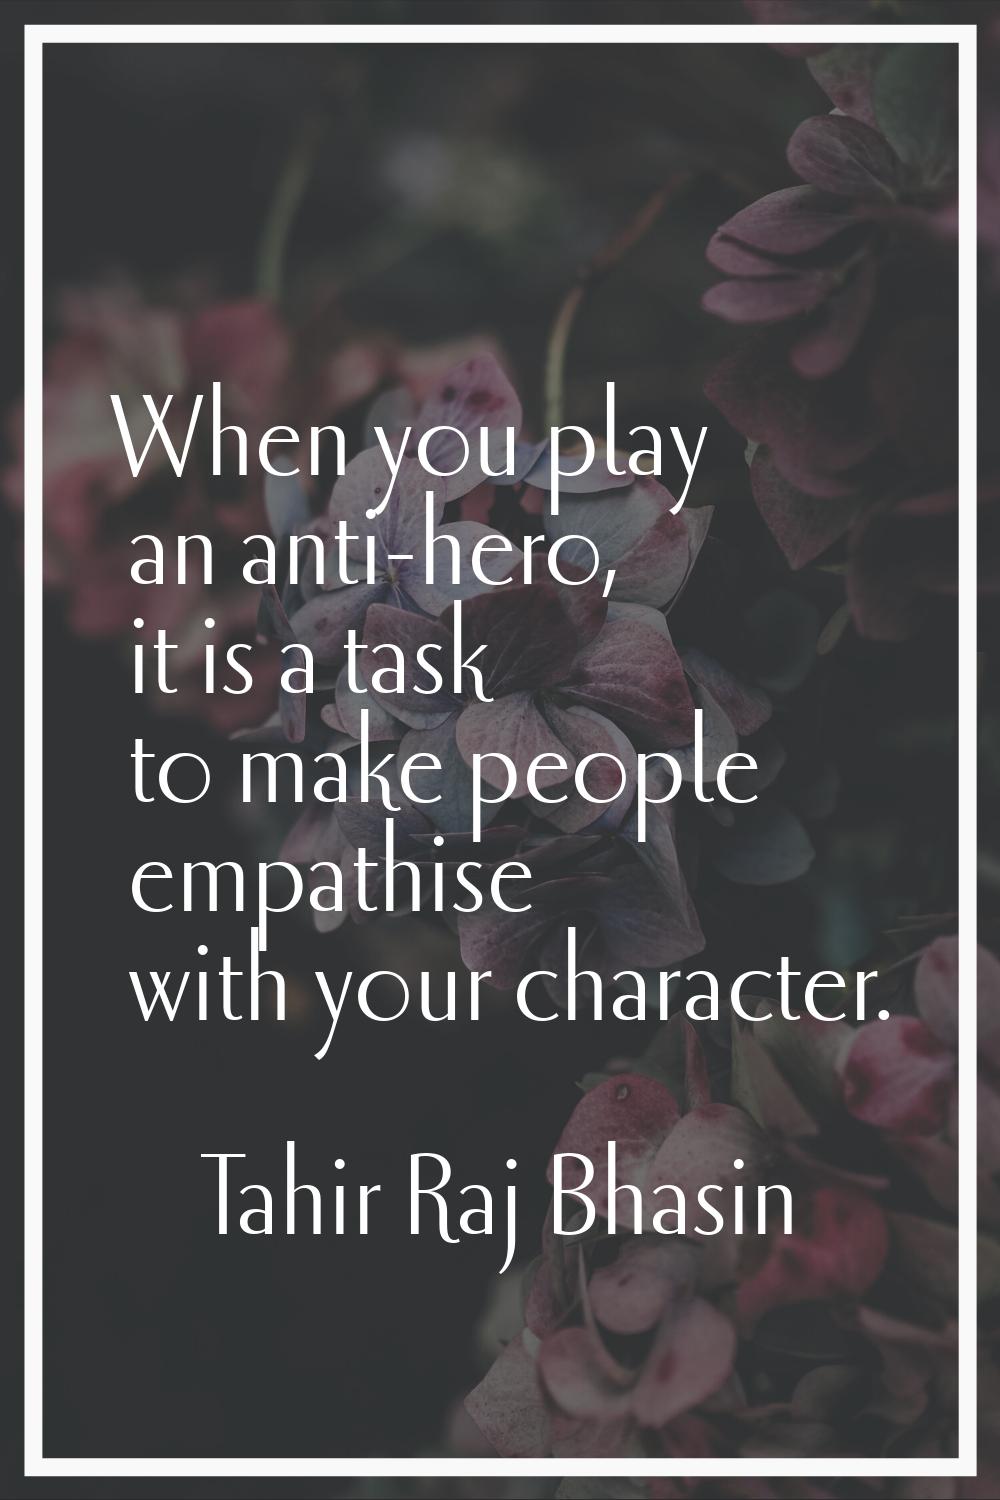 When you play an anti-hero, it is a task to make people empathise with your character.